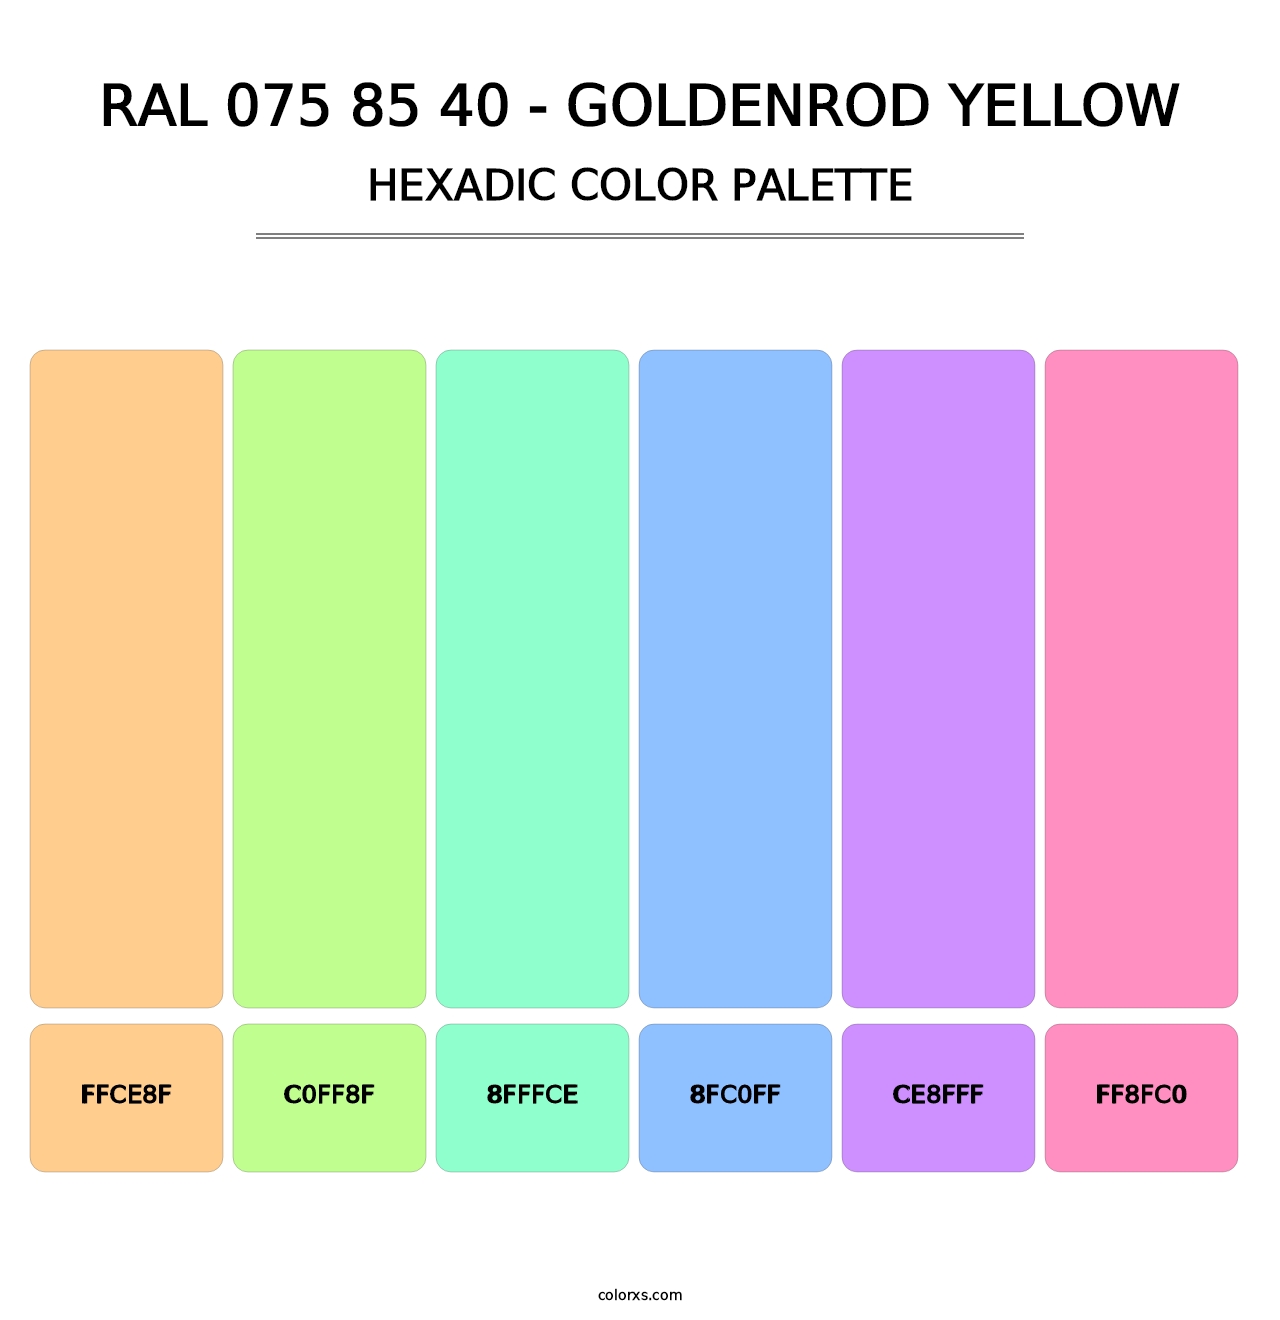 RAL 075 85 40 - Goldenrod Yellow - Hexadic Color Palette